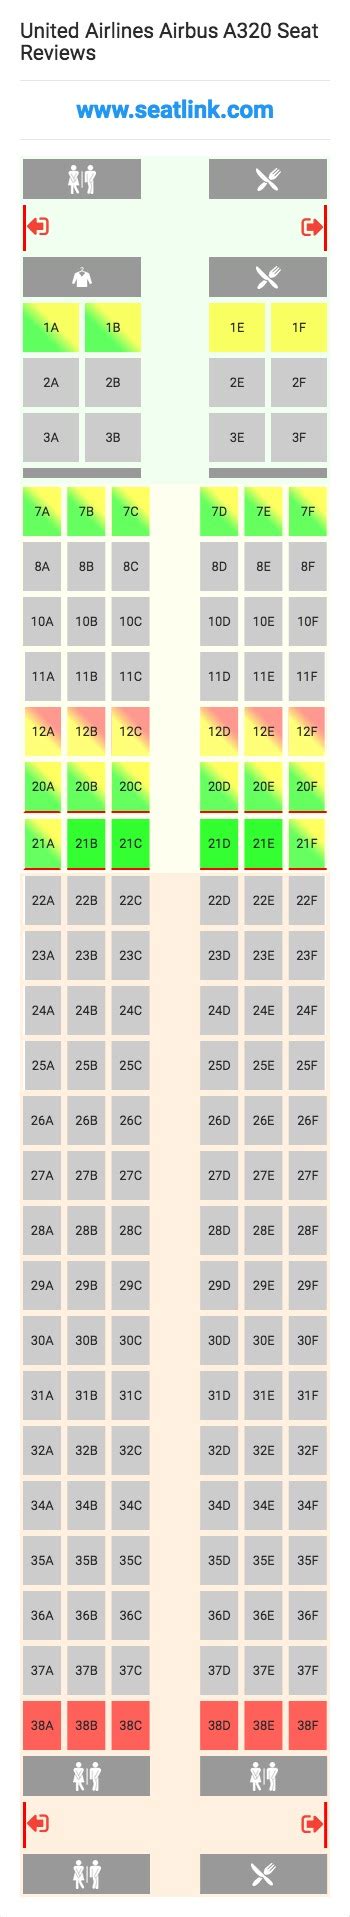 United Airlines Airbus A320 Seating Chart Updated May